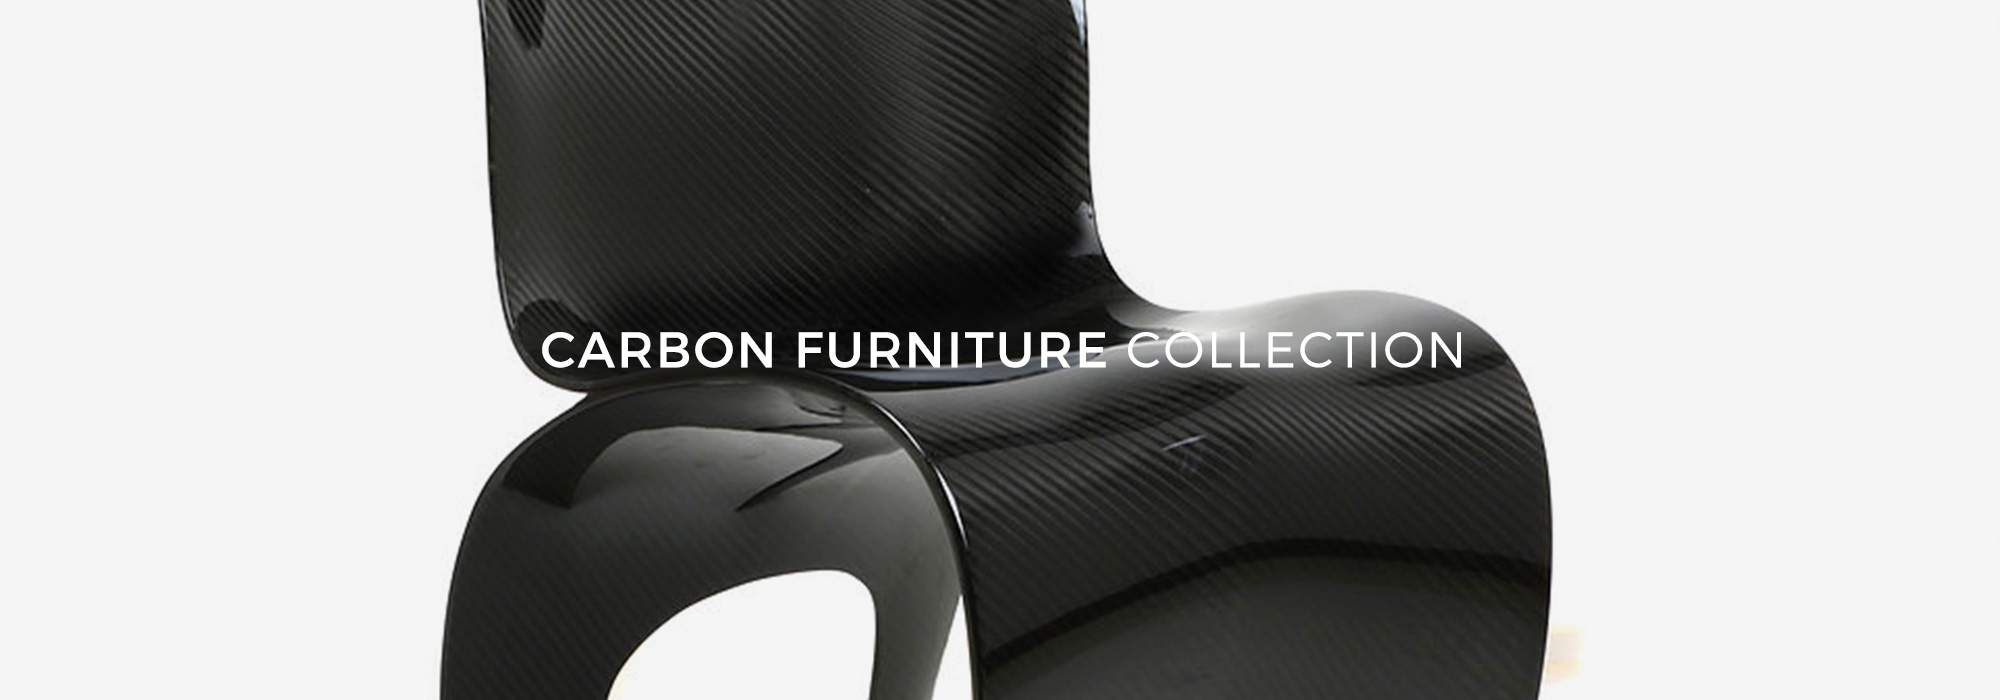 CARBON FURNITURE COLLECTION